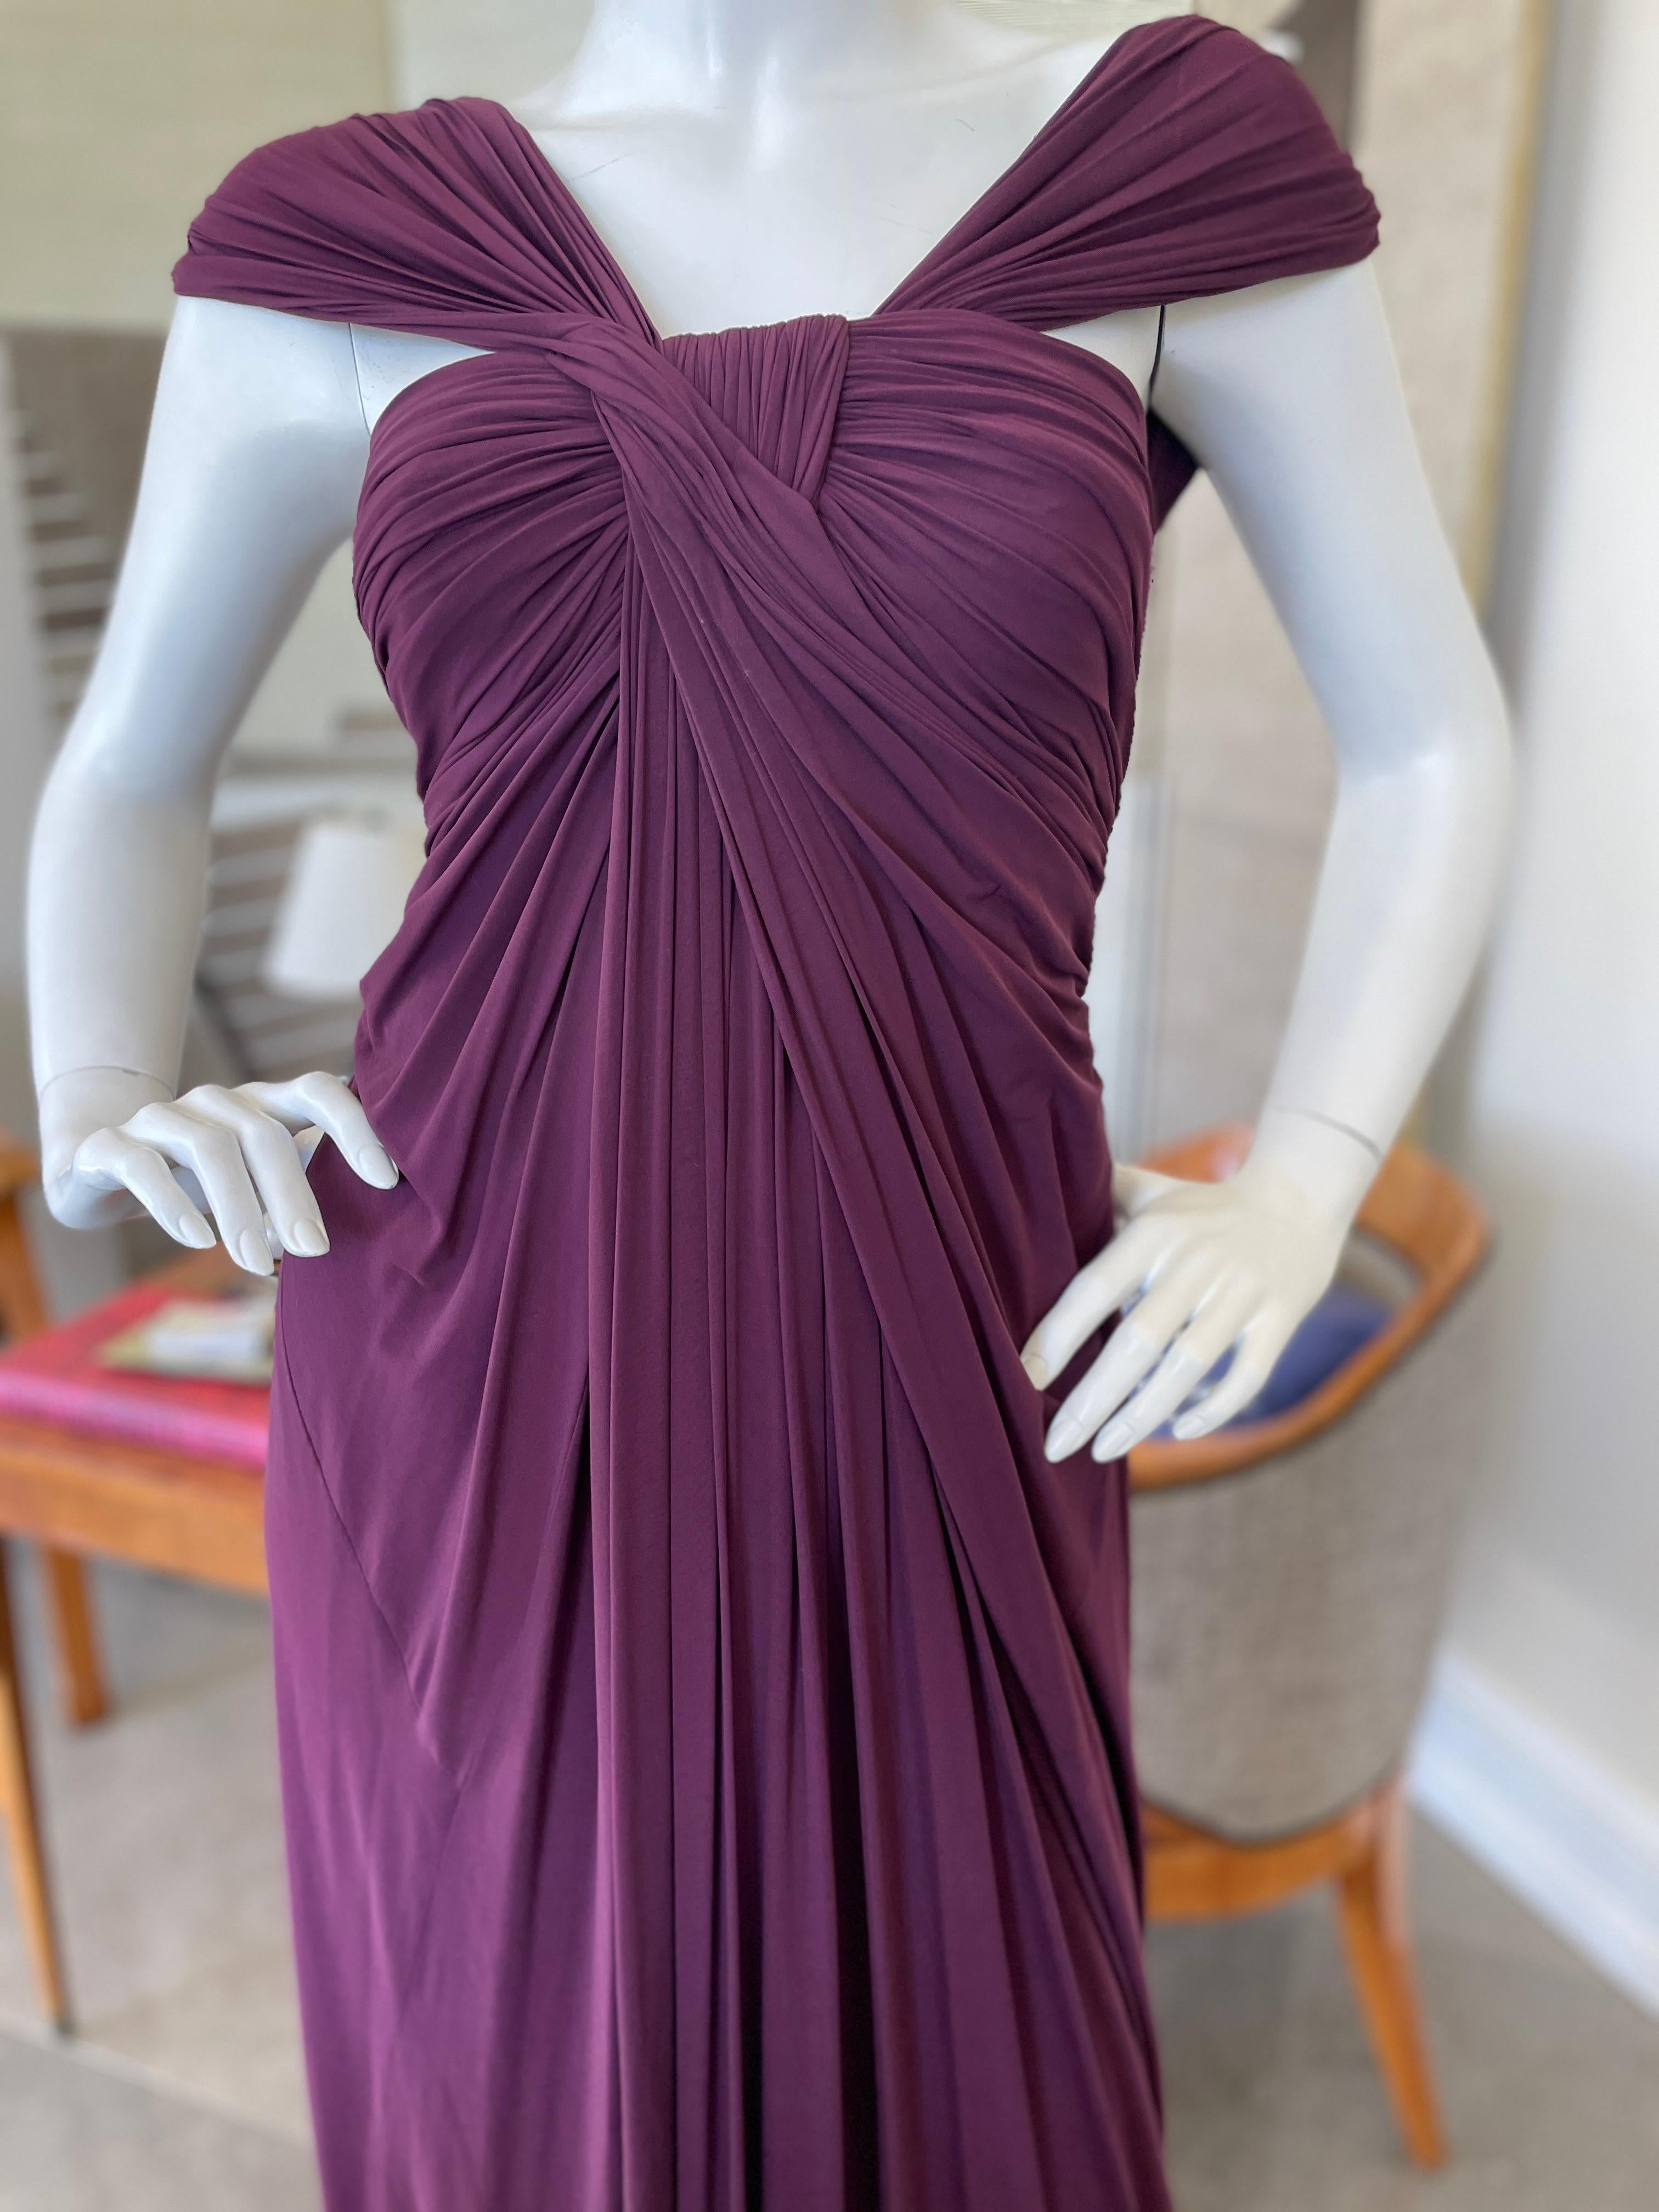 Donna Karan Vintage 1990's Purple Jersey Goddess Dress
Size S, there is a lot of stretch
Bust 34